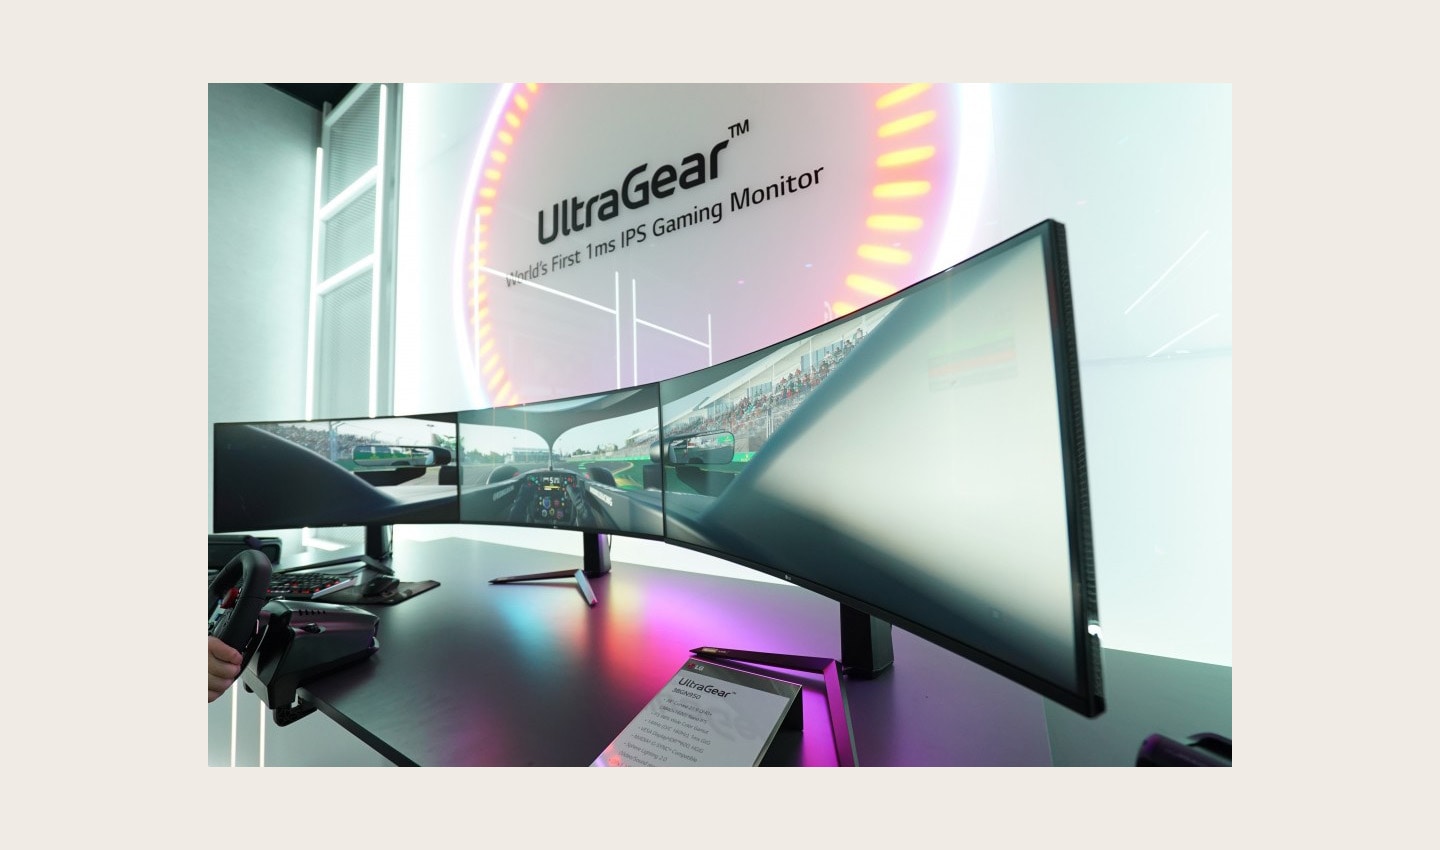 A closer look at three UltraGear monitors being used side-by-side to create one ultra-wide display to play a racing game at LG’s CES 2020 booth